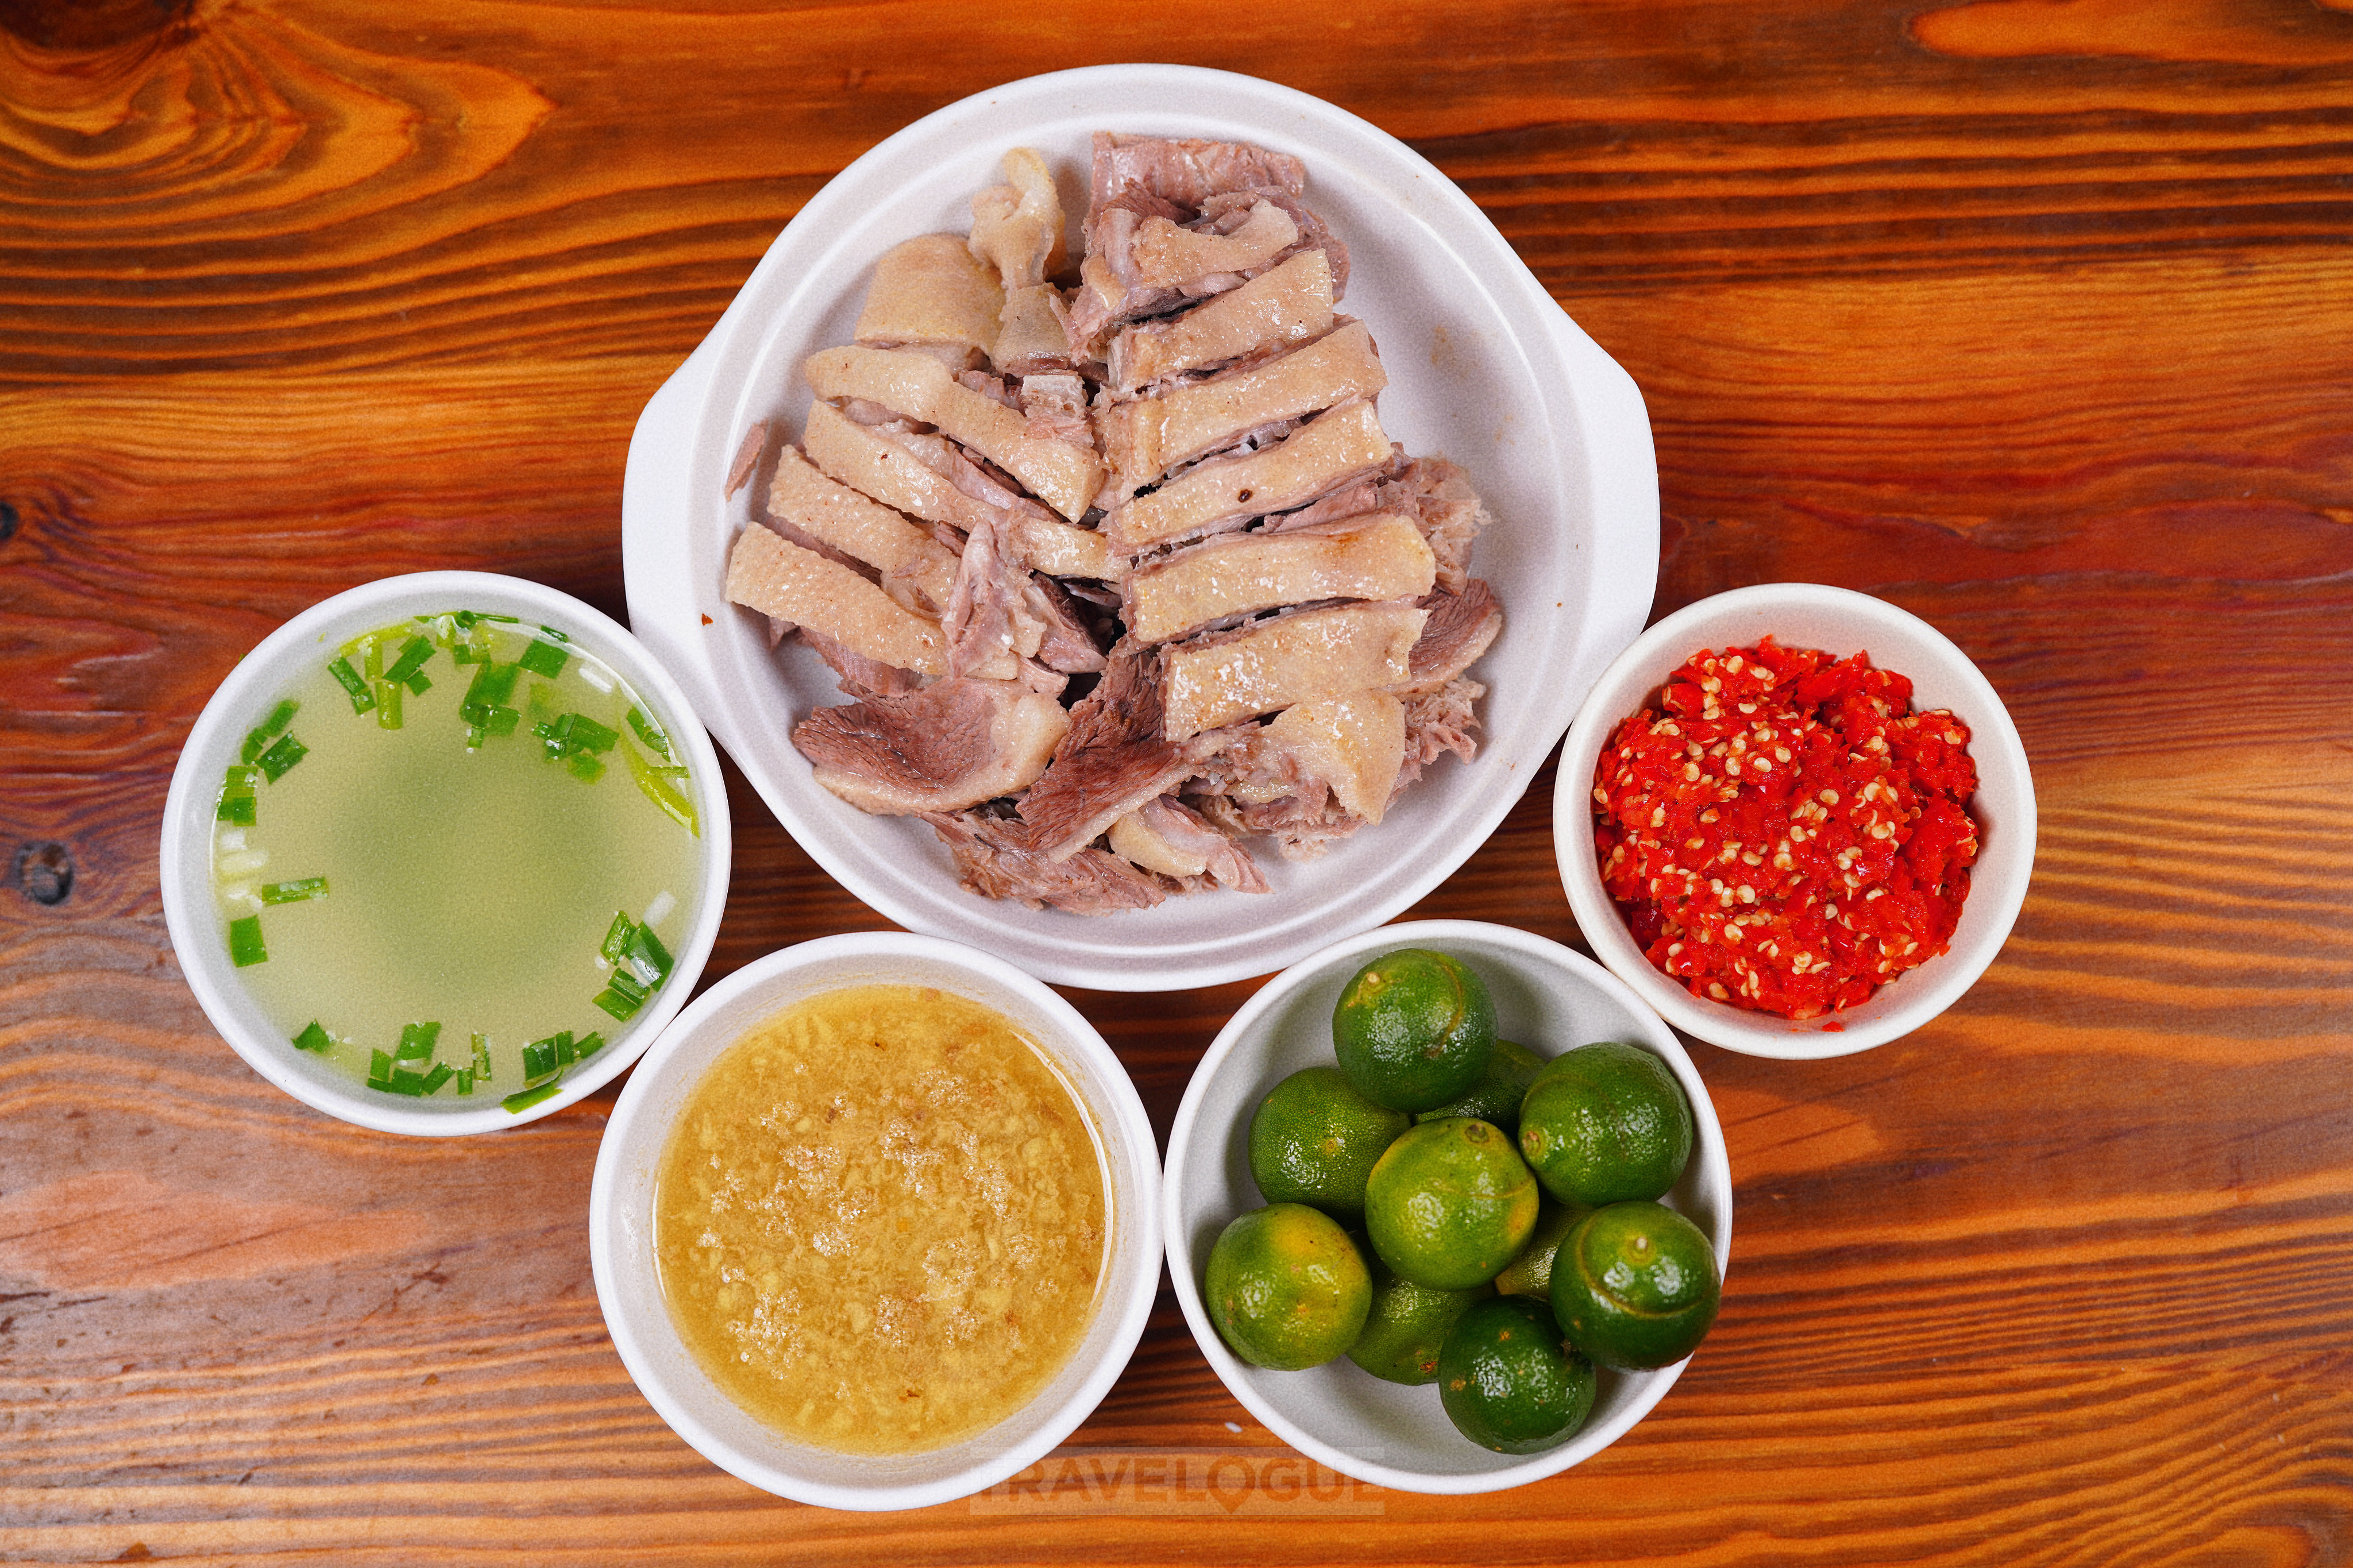 Jiaji Duck is made using an improved breed of duck introduced from overseas and cultivated in Hainan, where this dish ranks among the local favorites. Fortunately, cooking it isn't that difficult. The main goal is to draw out the duck's natural flavor. /CGTN